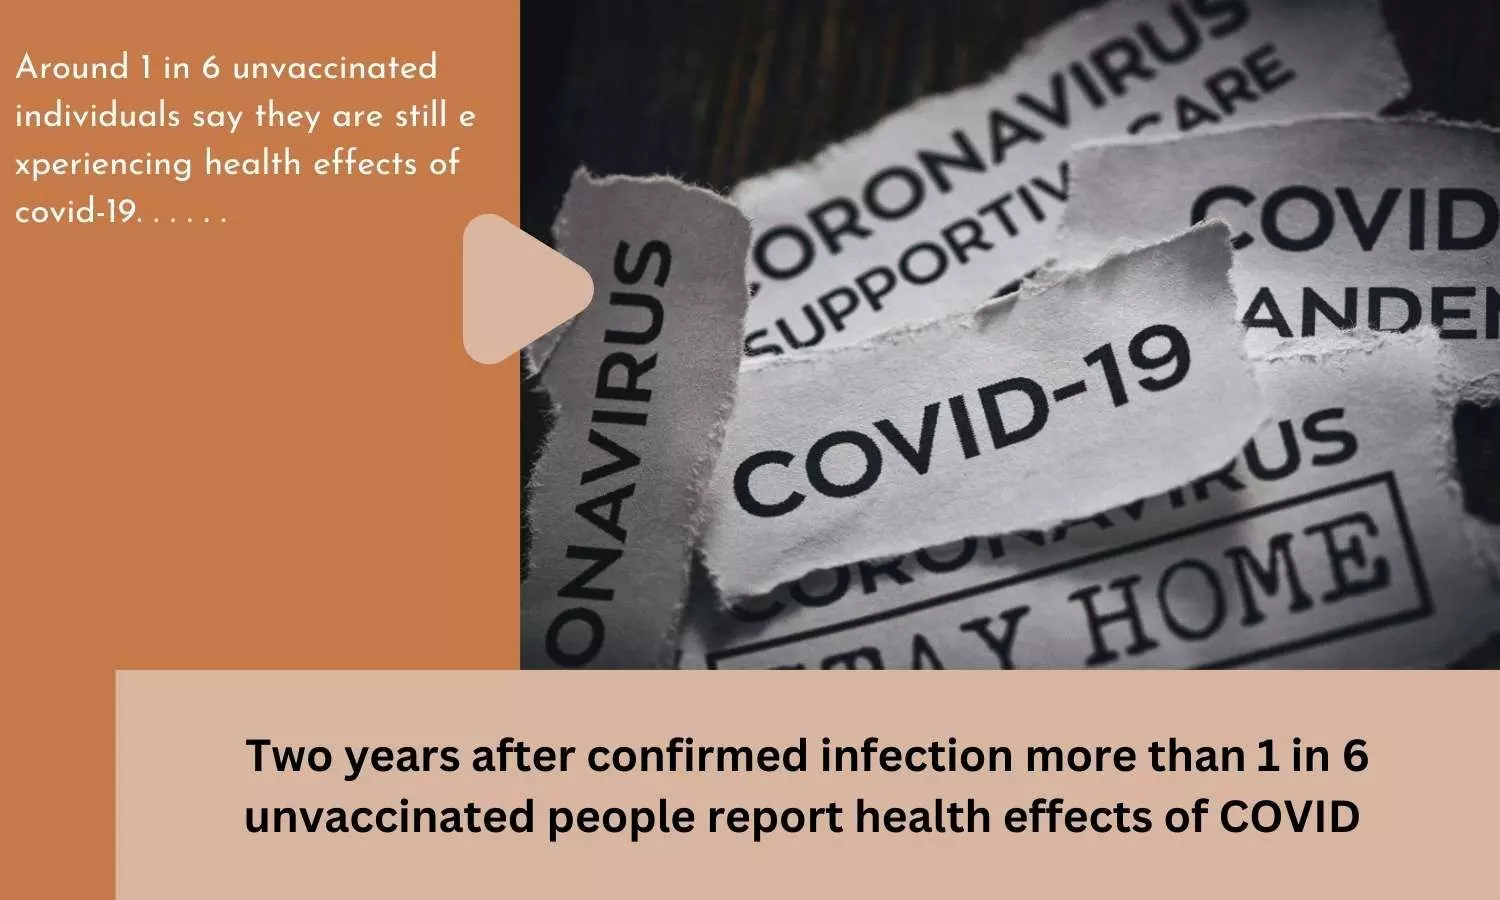 Two years after confirmed infection more than 1 in 6 unvaccinated people report health effects of COVID